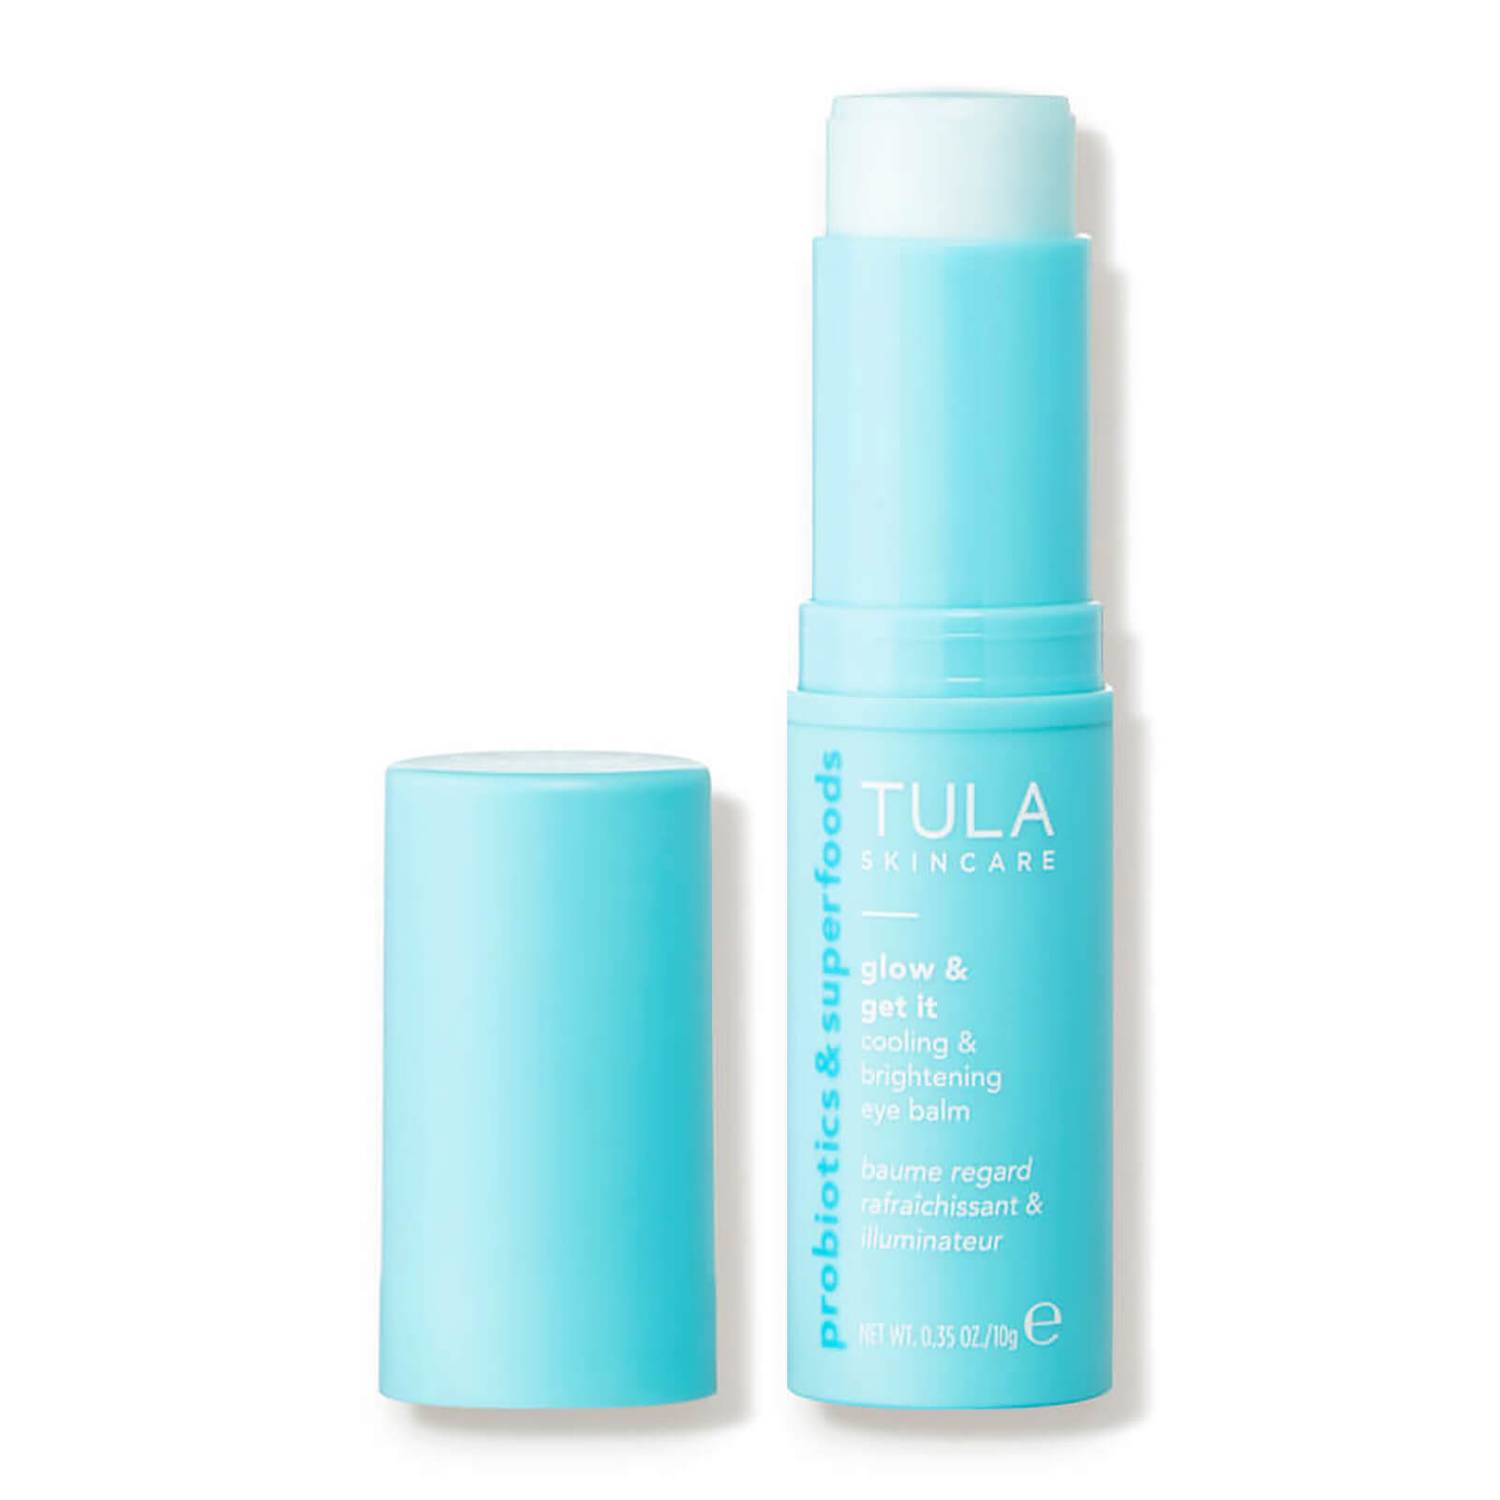 Reviewed: Tula's Eye Balm Provides a Quick Fix for Tired Eyes